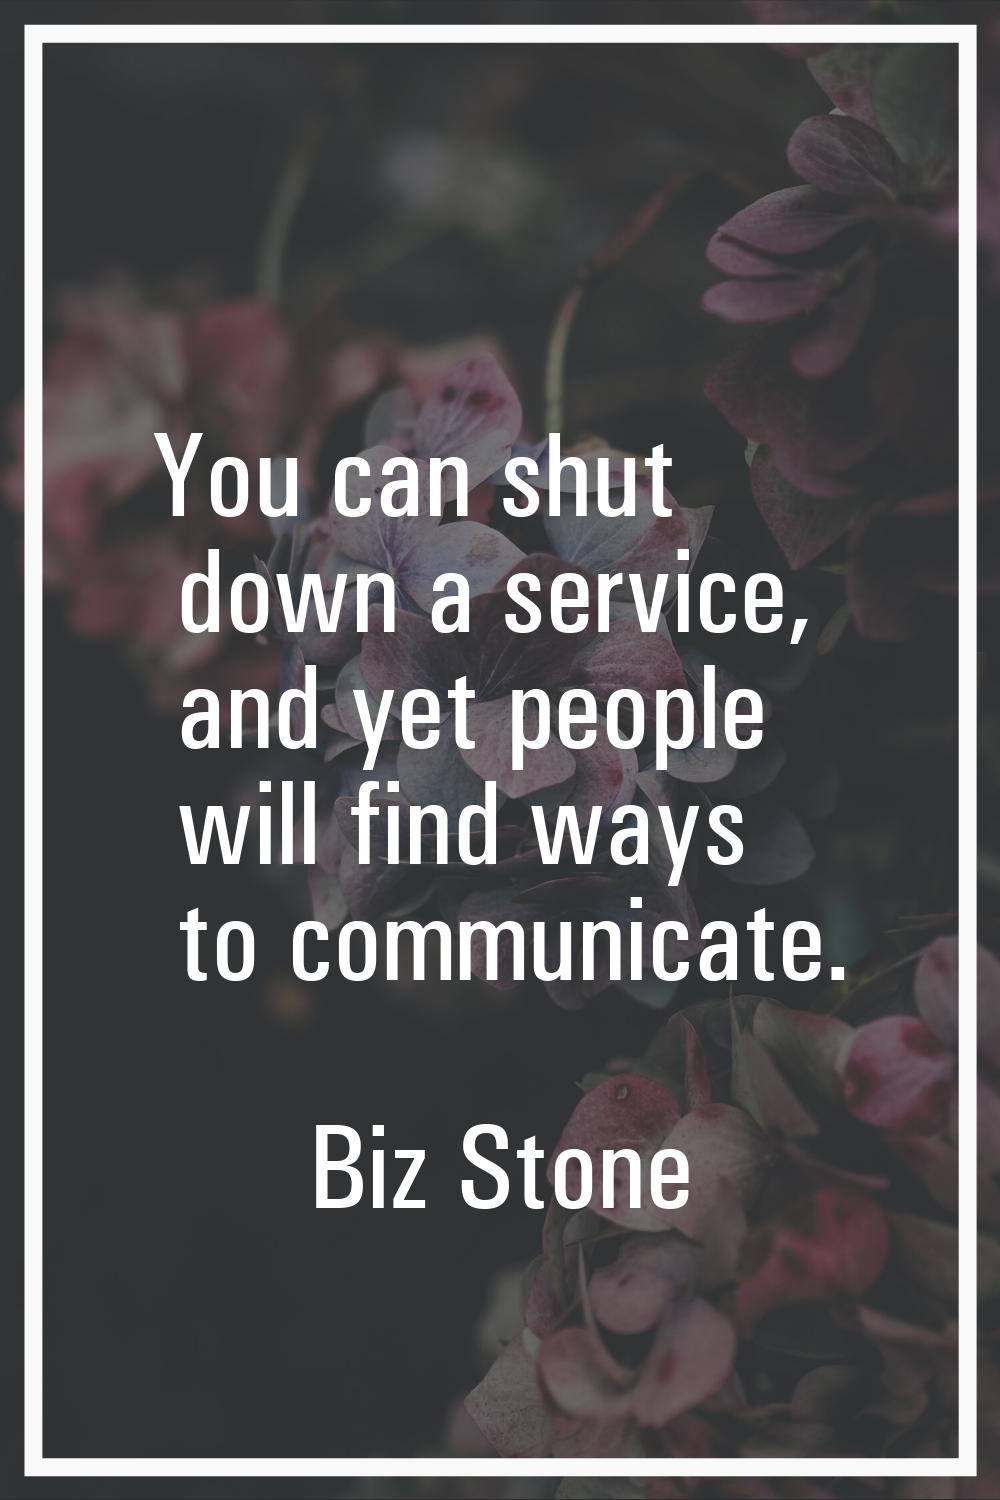 You can shut down a service, and yet people will find ways to communicate.